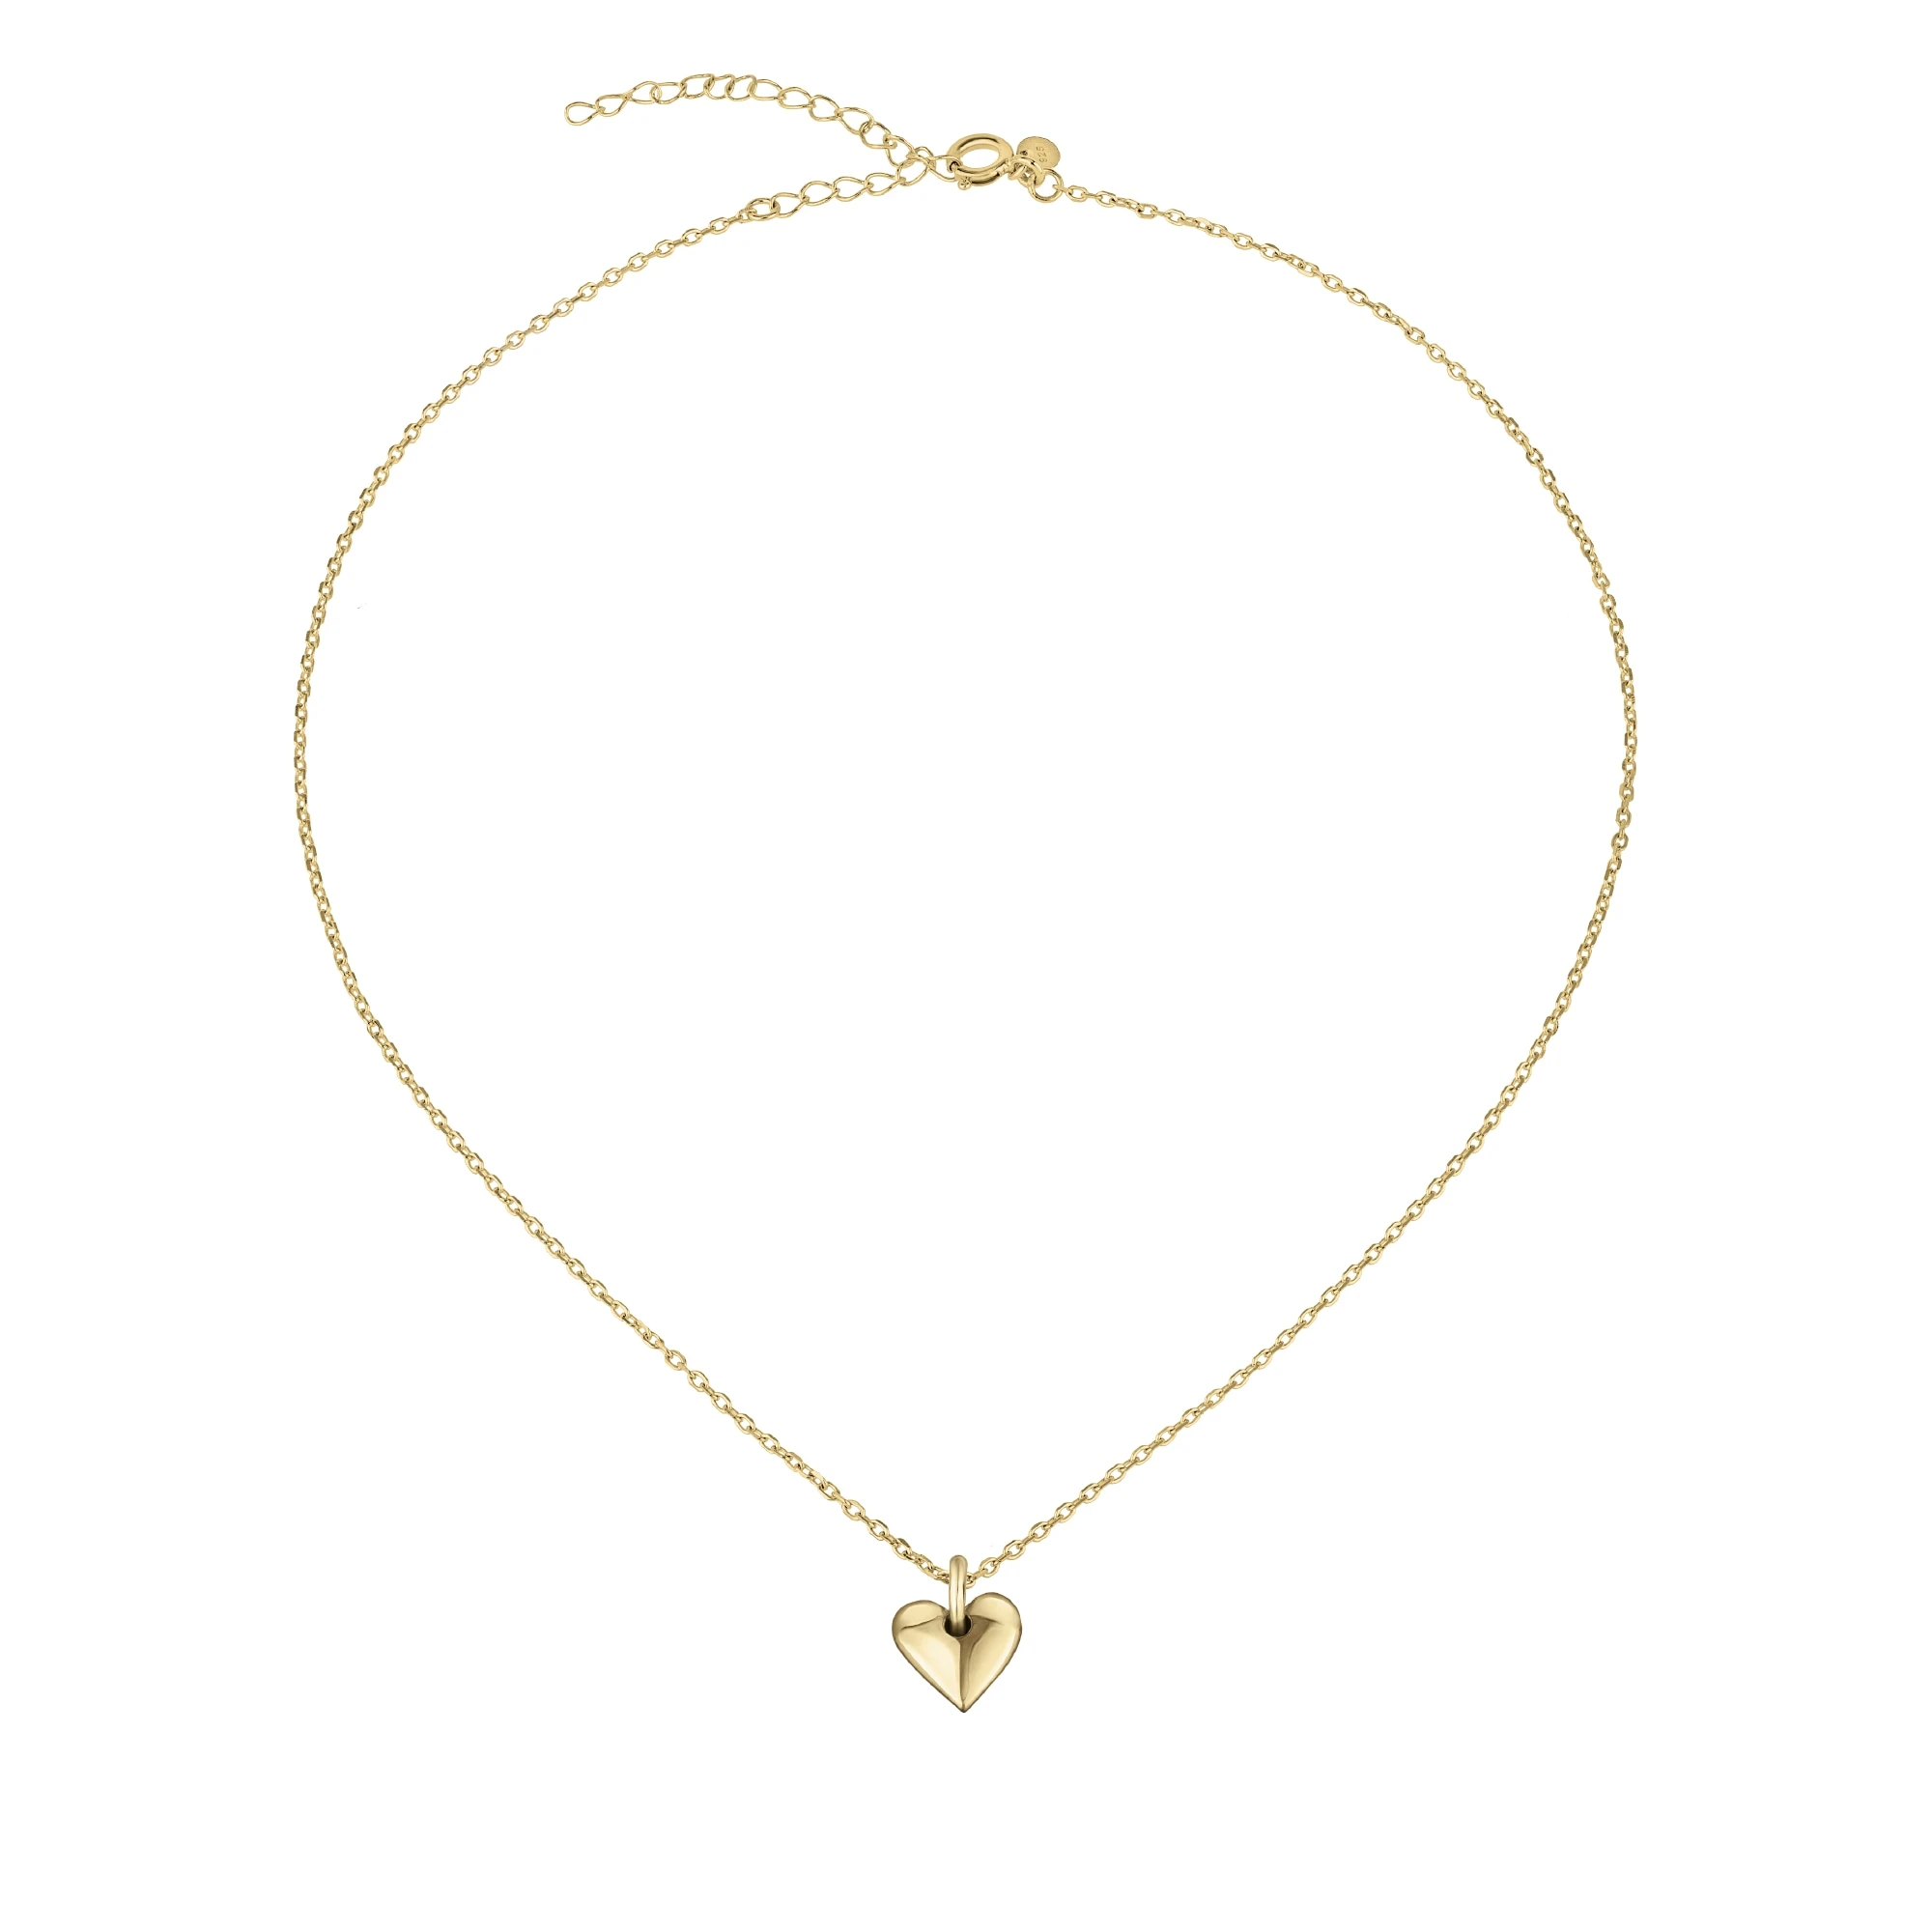 DARLING - 18K GOLD PLATED SILVER CHAIN WITH PENDANT - 1 - TJ3154 | Breil